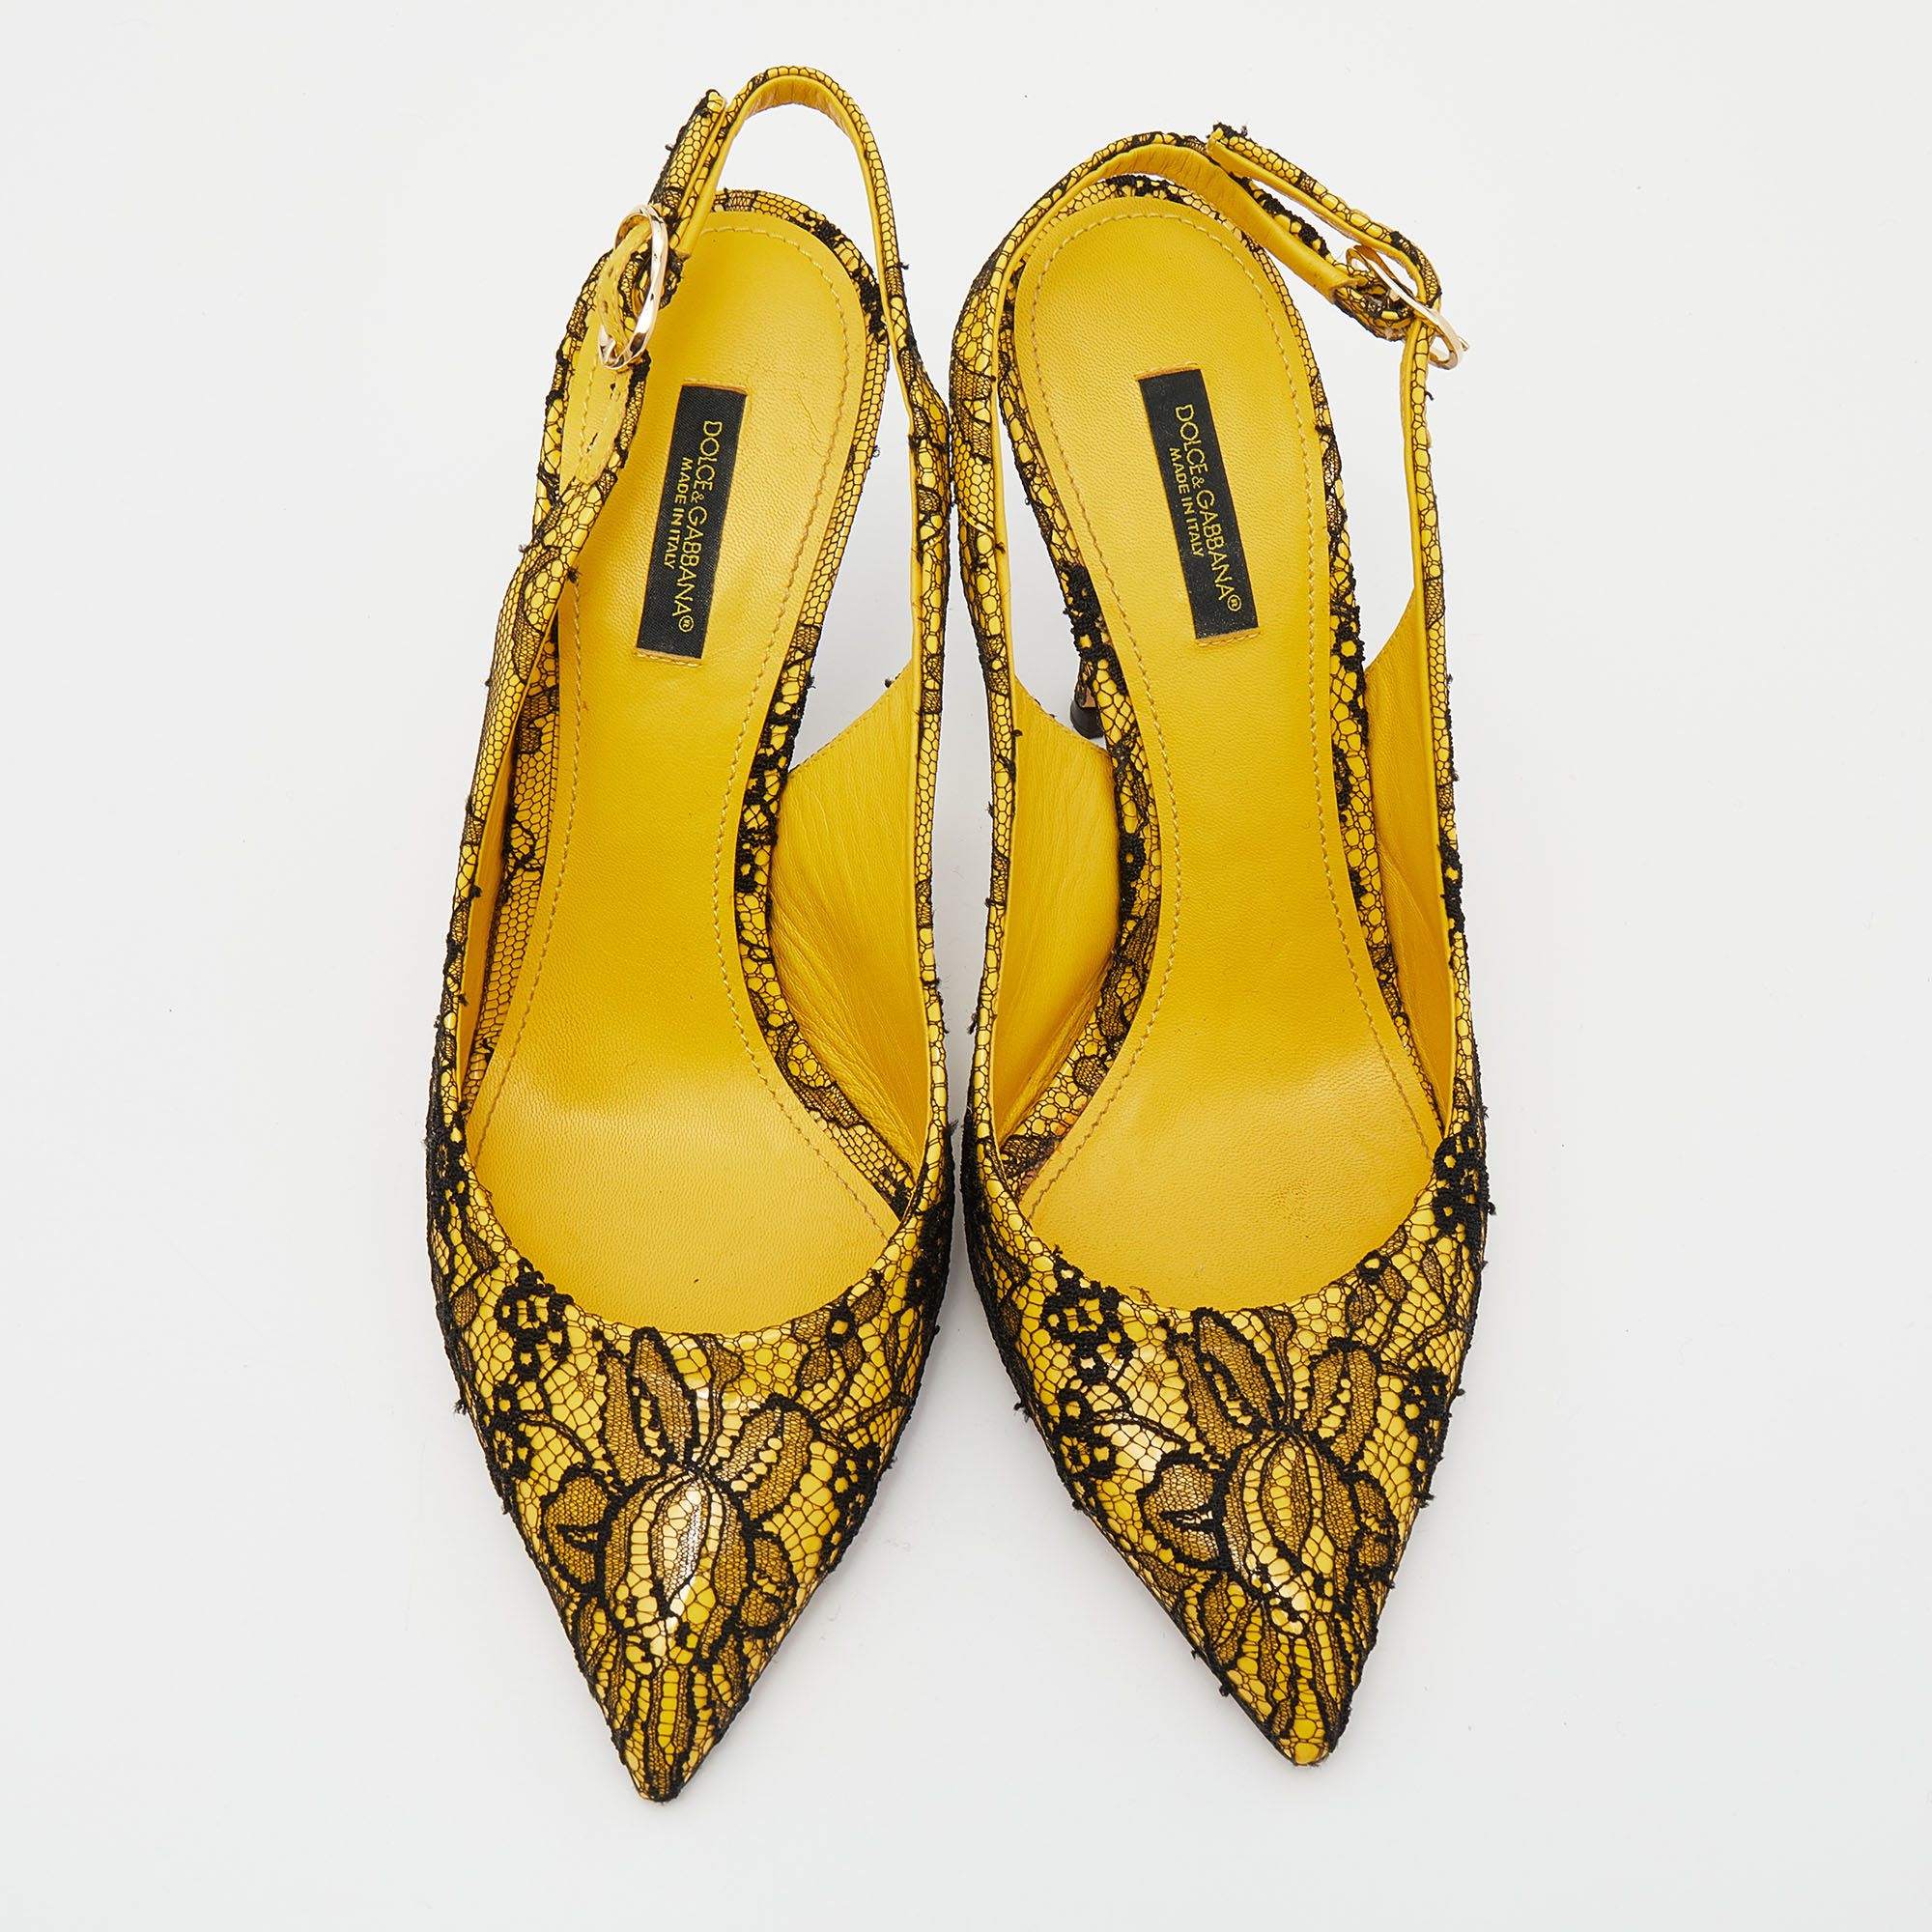 Dolce & Gabbana Yellow/Black Patent Leather And Chantilly Lace Bellucci Slingback Sandals Size 39